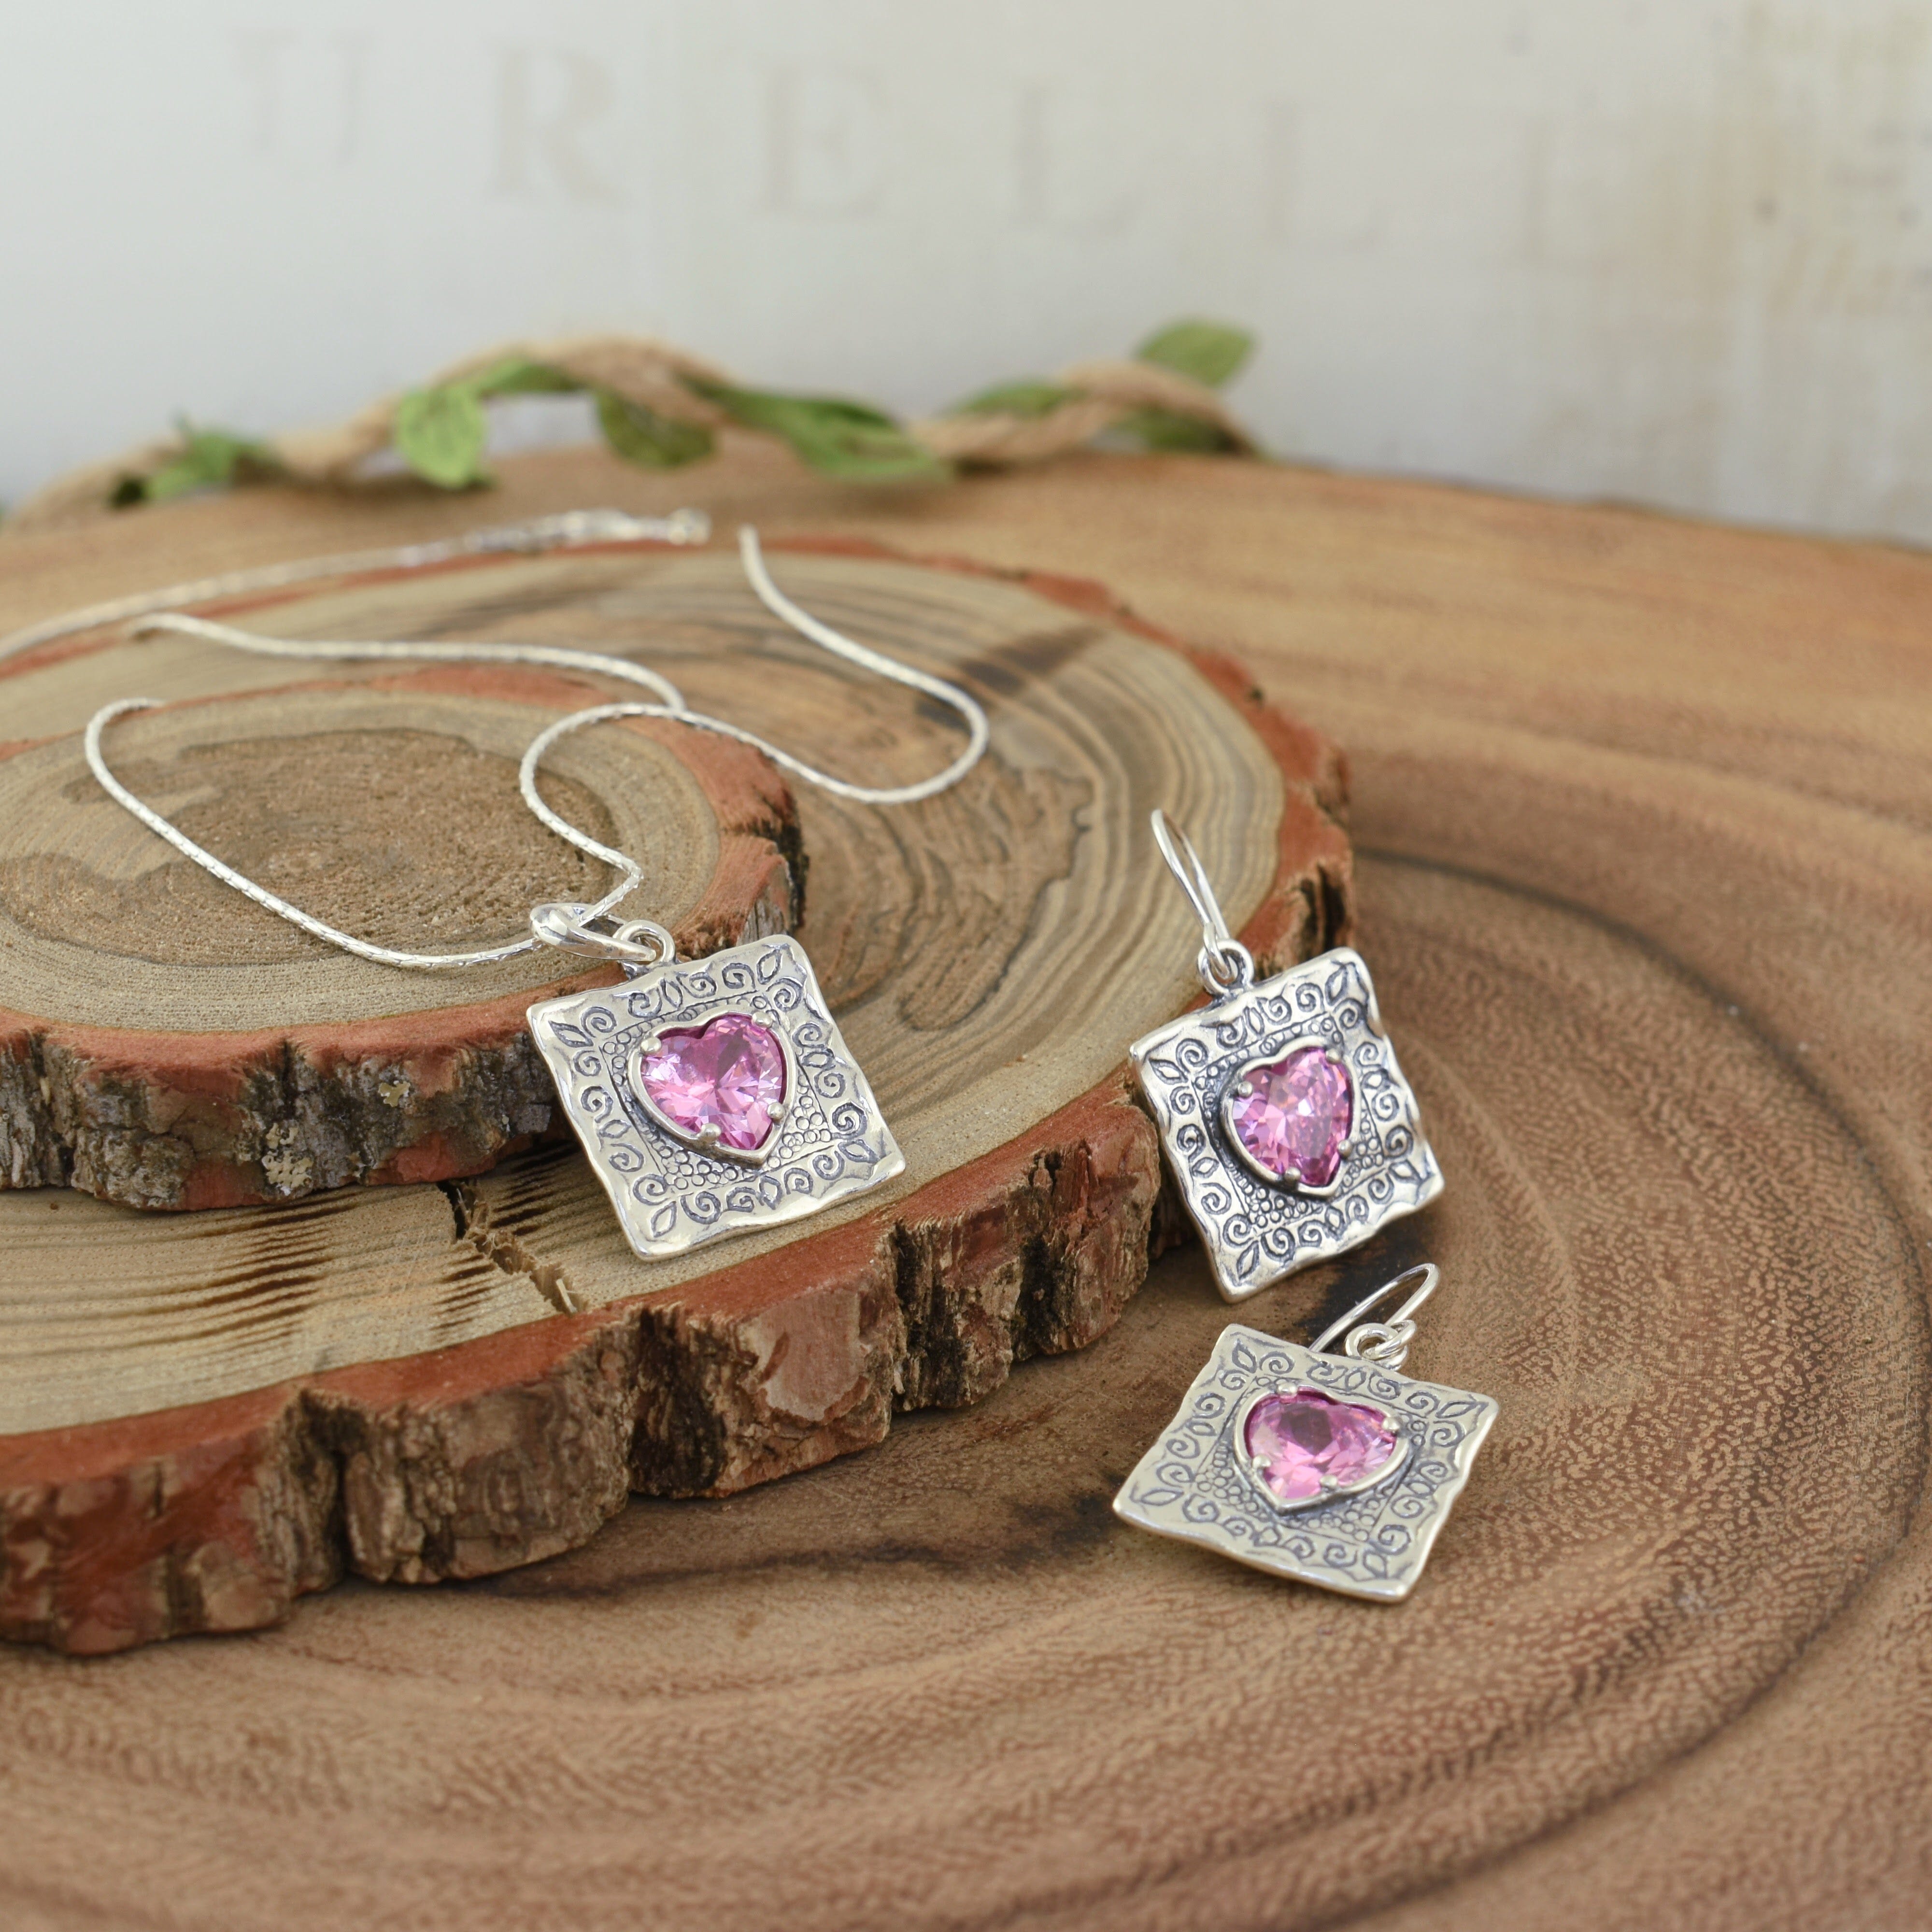 Matching sterling silver and pink heart necklace and earrings